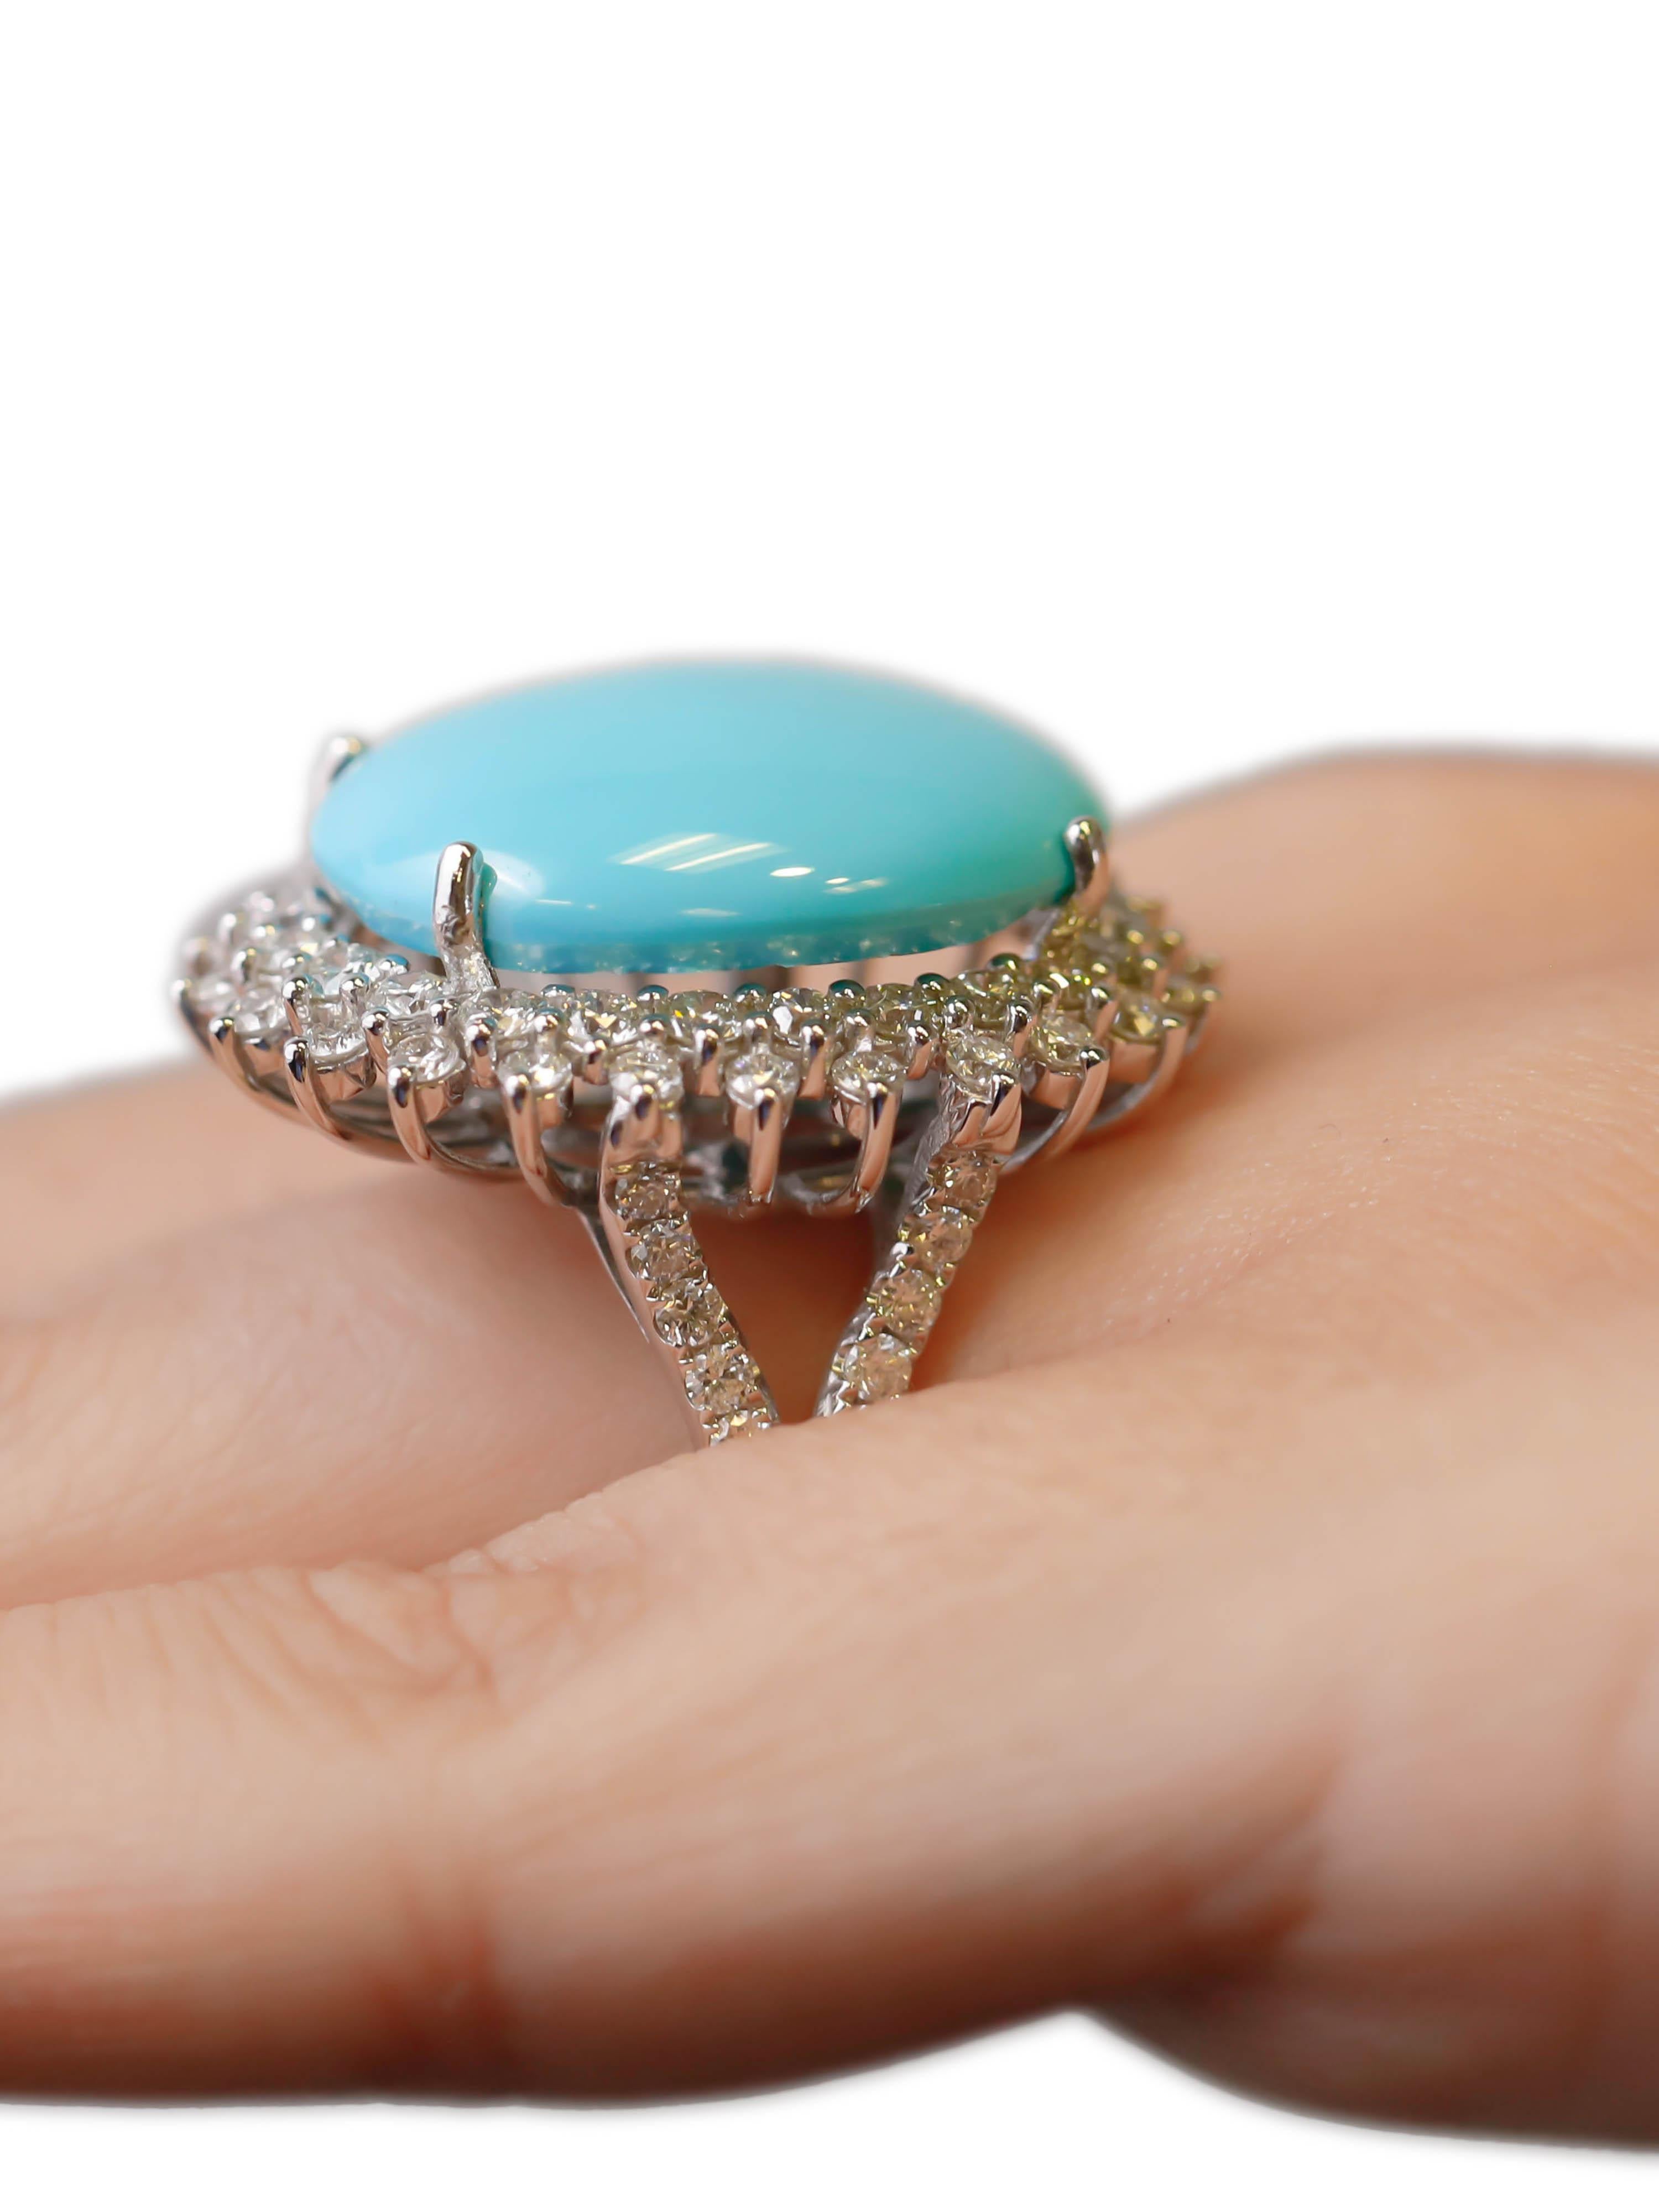 Oval Cut Diamond Pave 18 Karat White Gold 18.5 Carat Turquoise Solitaire Cocktail Ring